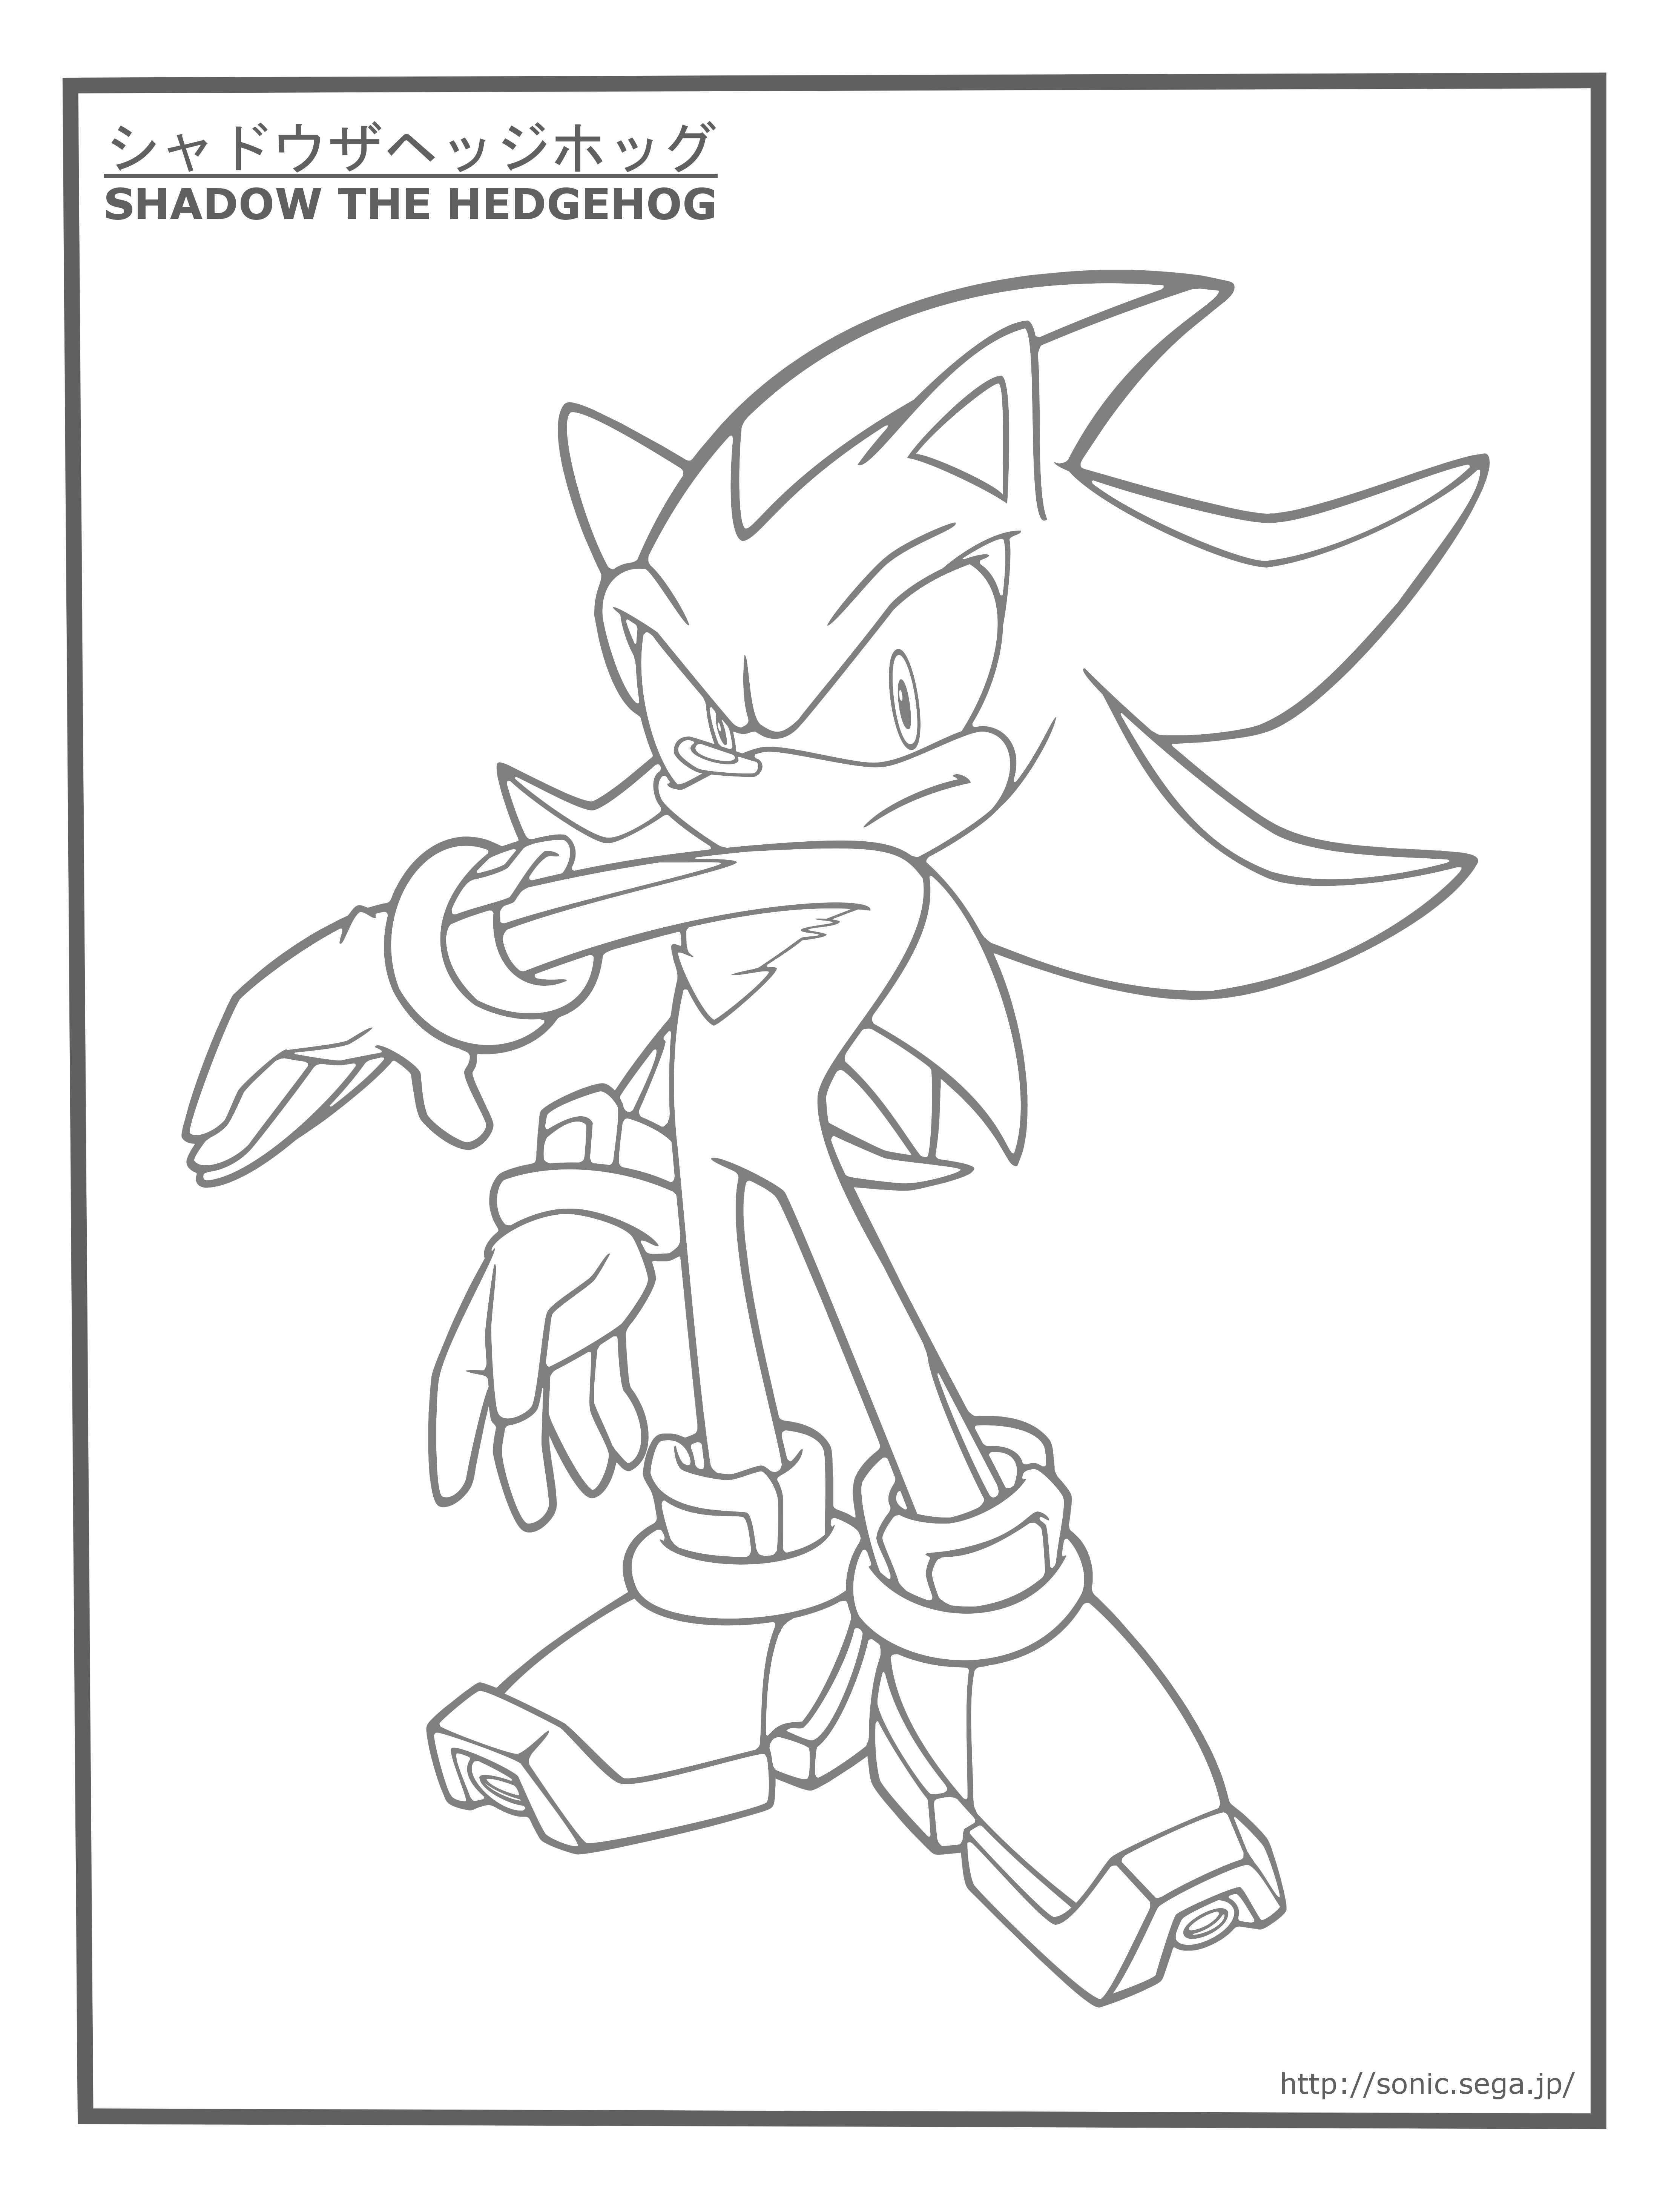 shadow the hedgehog coloring pages shadow the hedgehog coloring pages to download and print hedgehog pages shadow the coloring 